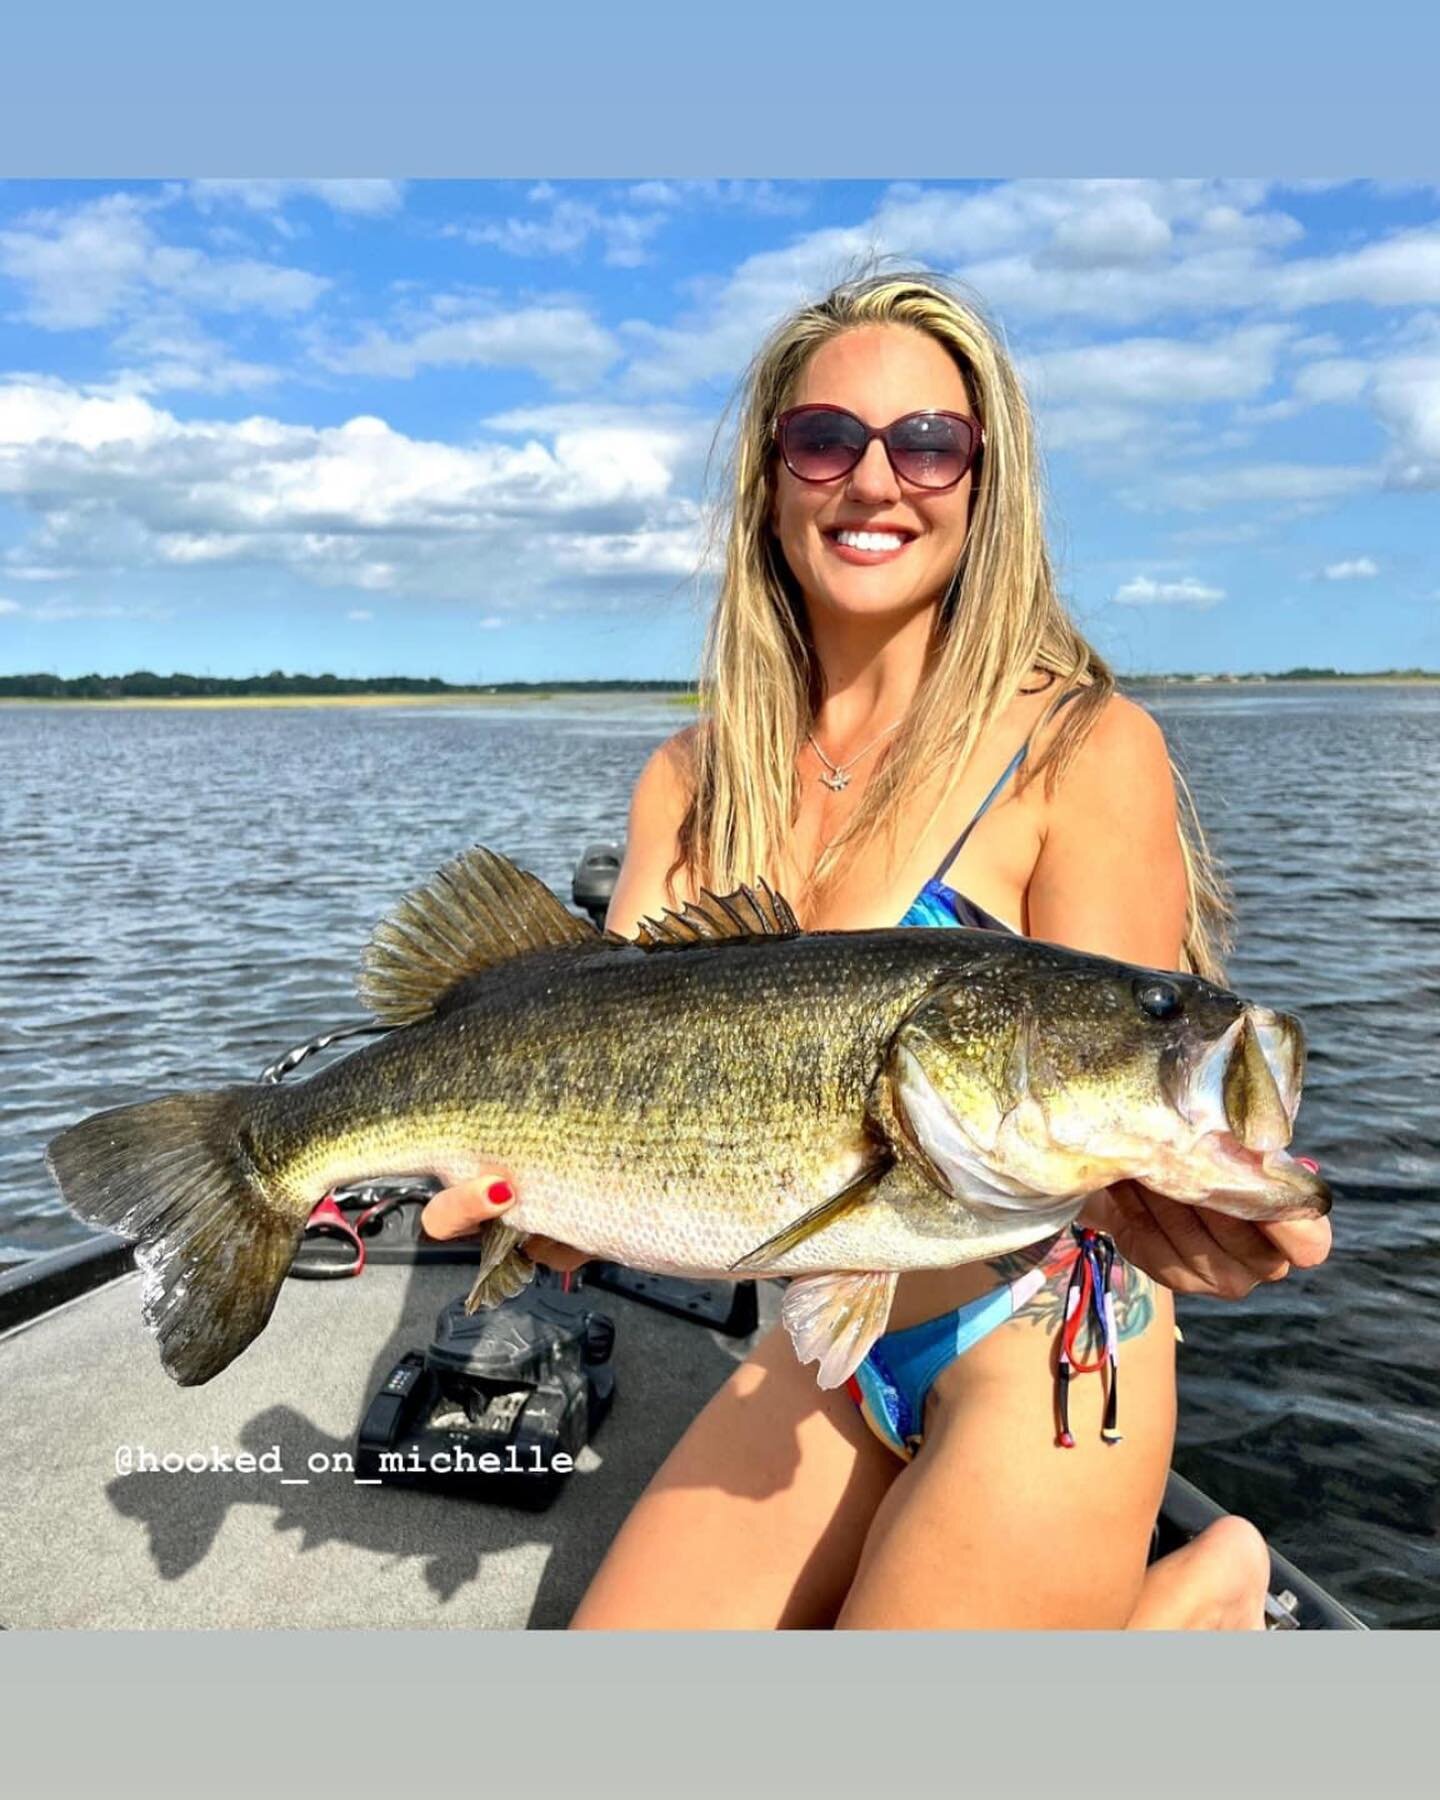 I had the pleasure of taking @hooked_on_michelle  fishing the other day! And what did she do? She caught her new personal Best Largemouth Bass 8lbs😍🤩 She is one great fisherwoman and an even better person! Can&rsquo;t wait to get out fishing with h